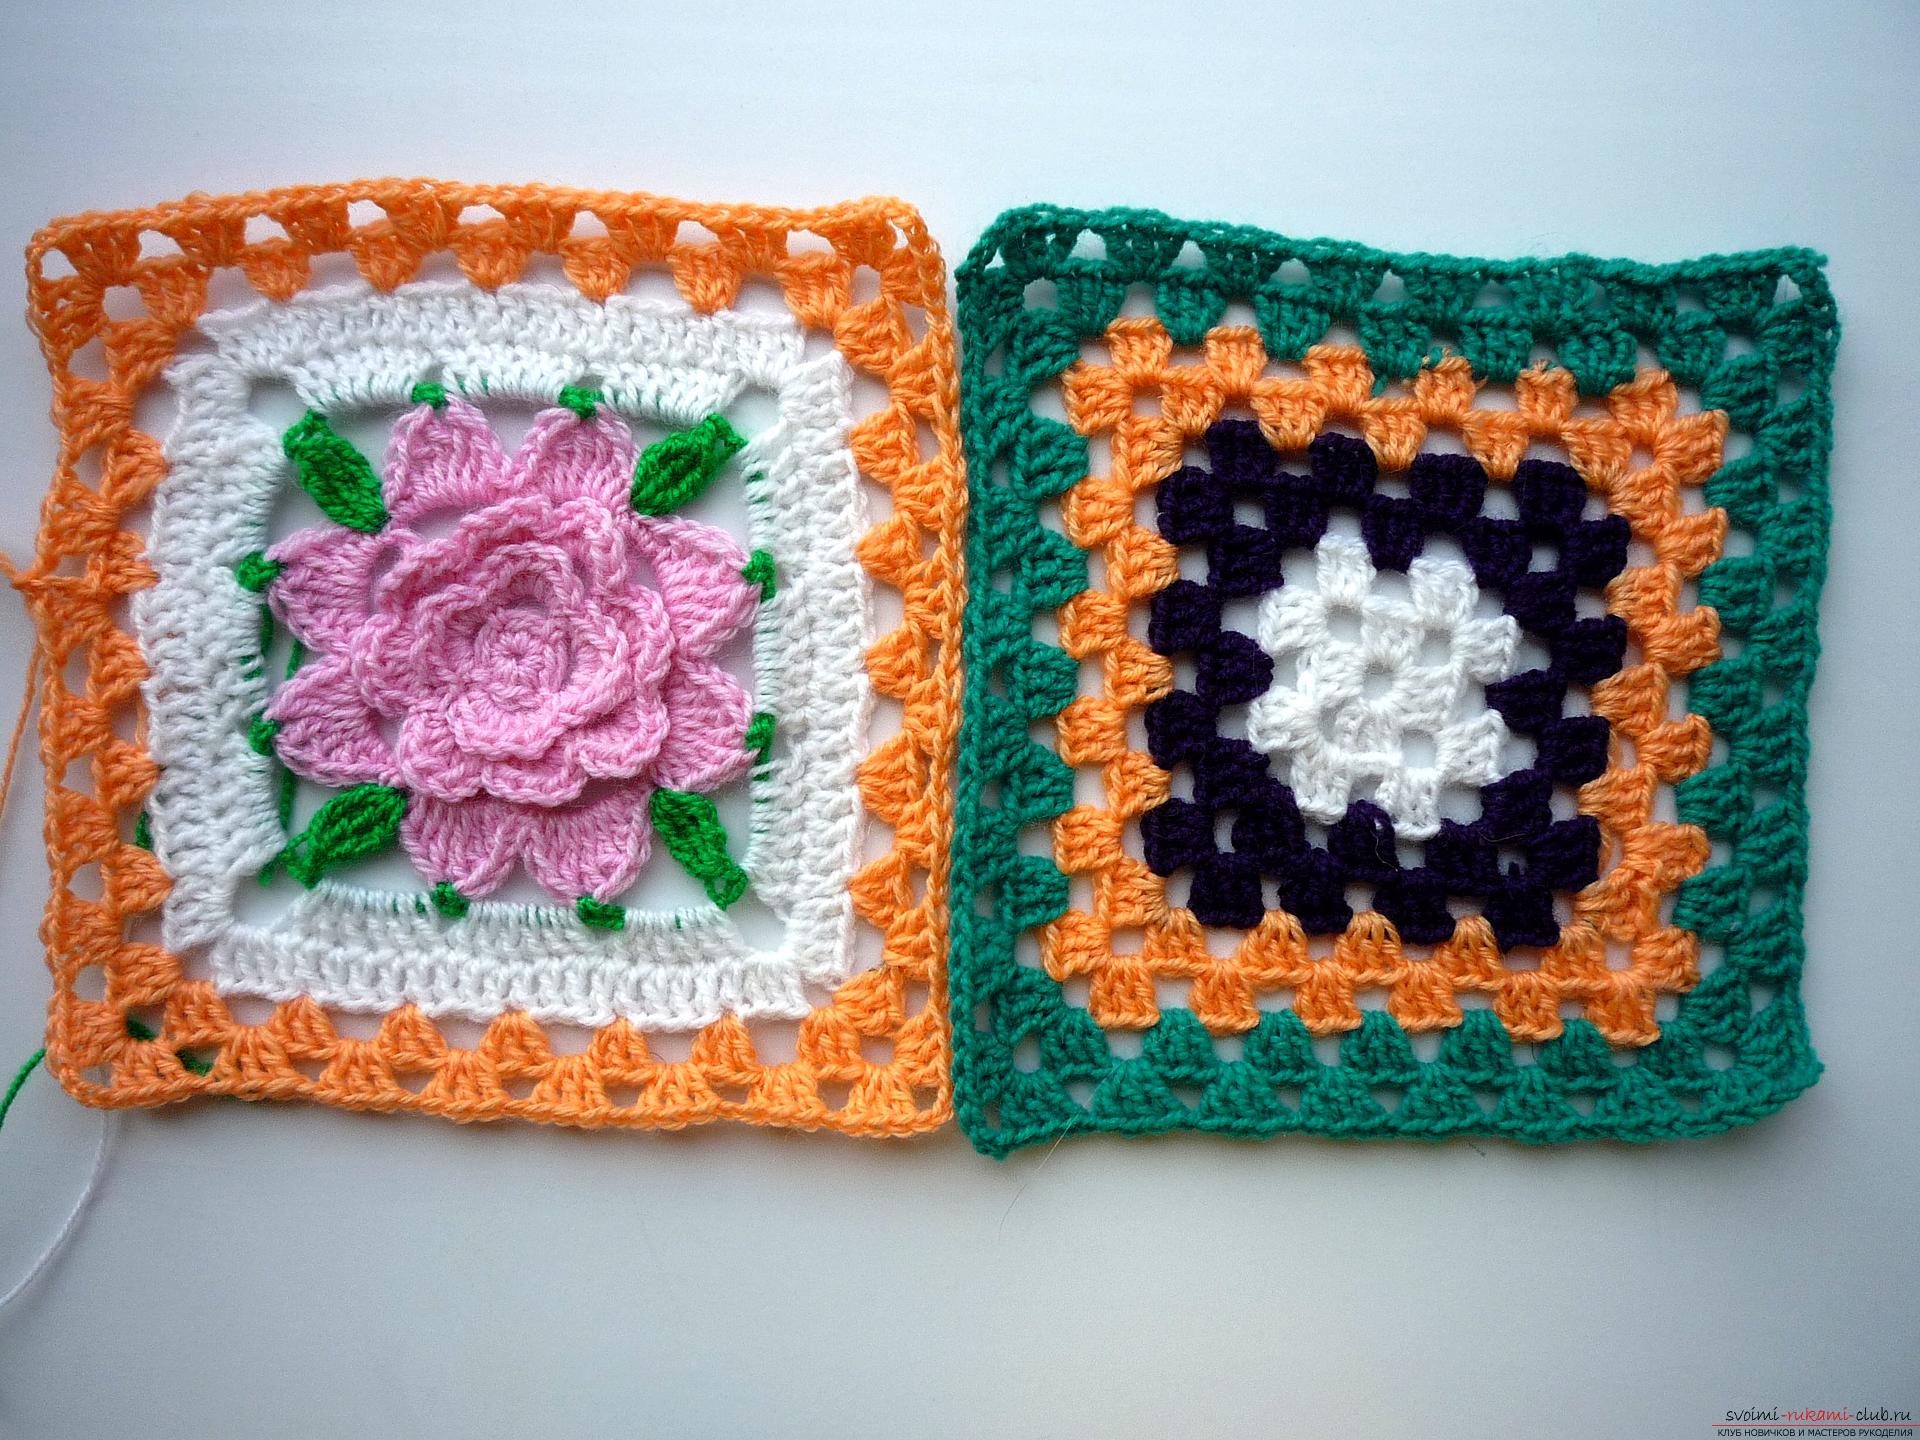 This master class of crocheting contains a crochet flower scheme for a plaid .. Photo # 24